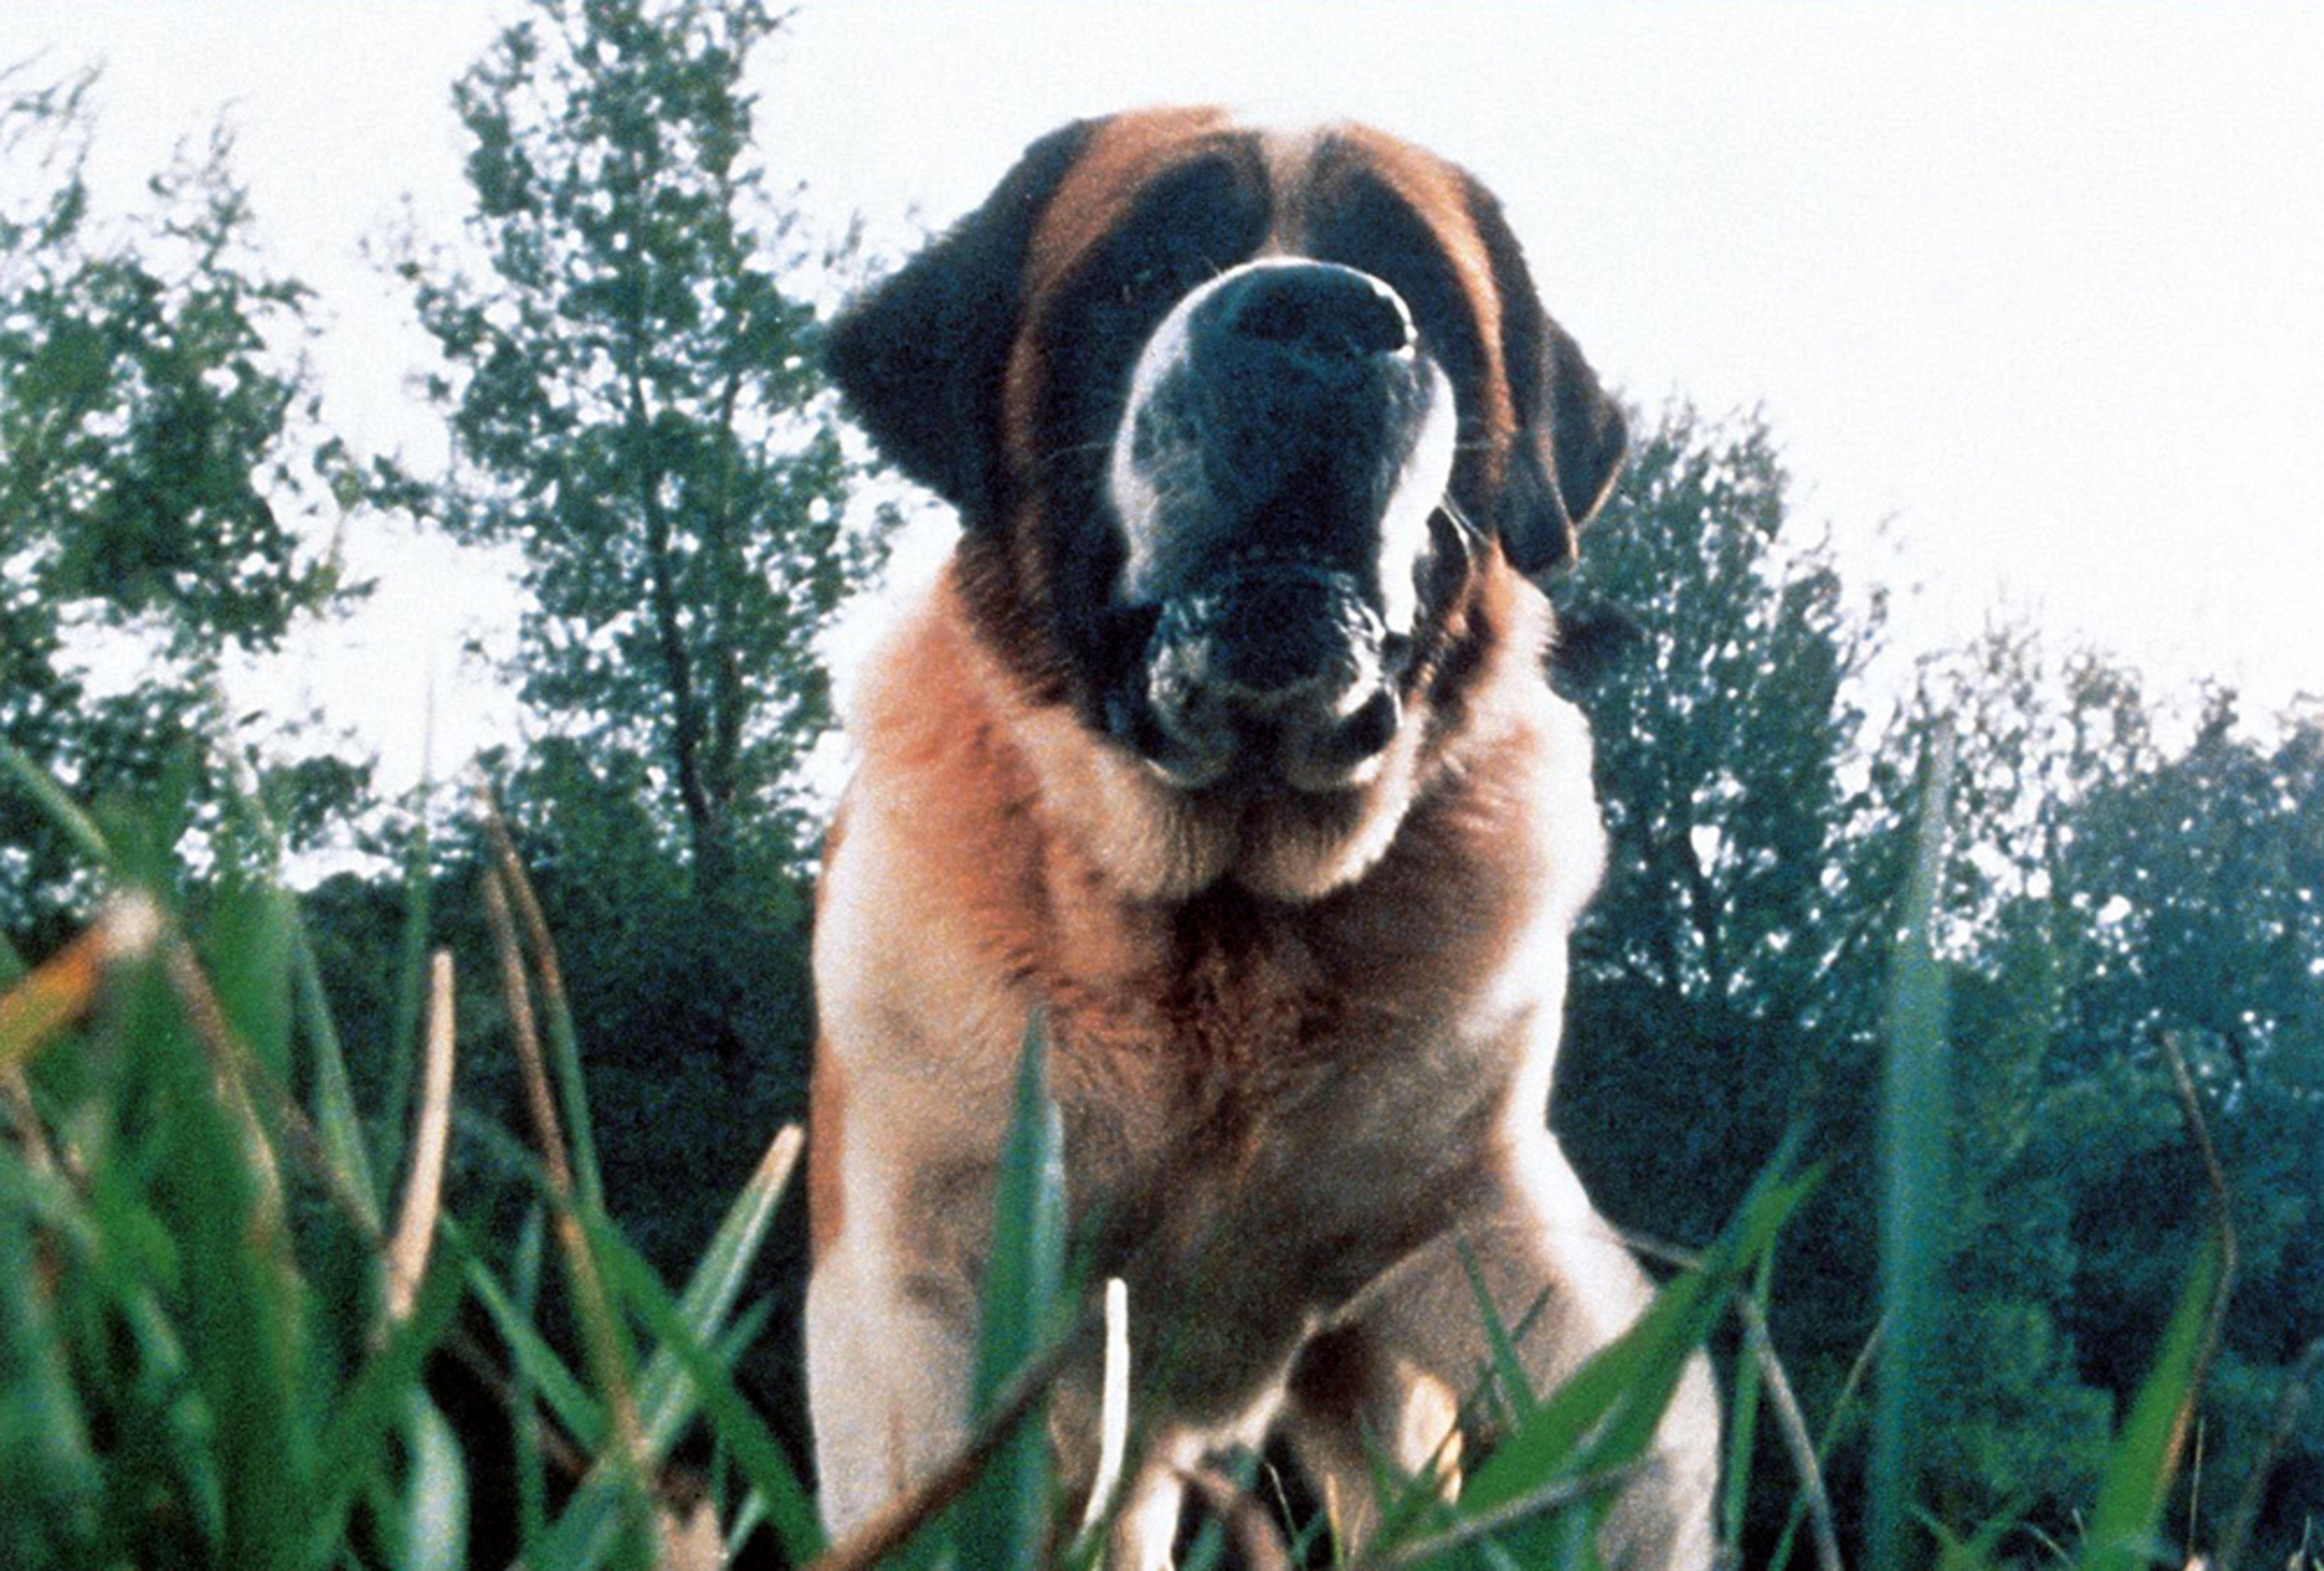 <p>Benji is a friendly dog. Cujo? Not so much. Admittedly, he was nice enough at first. Then, the massive St. Bernard contracted rabies. Suddenly, he was rabid, violent, and trapped a mother and her son in their car in this adaptation of a Stephen King story.</p><p>You may also like: <a href='https://www.yardbarker.com/entertainment/articles/20_facts_you_might_not_know_about_heat_092723/s1__35424164'>20 facts you might not know about 'Heat'</a></p>